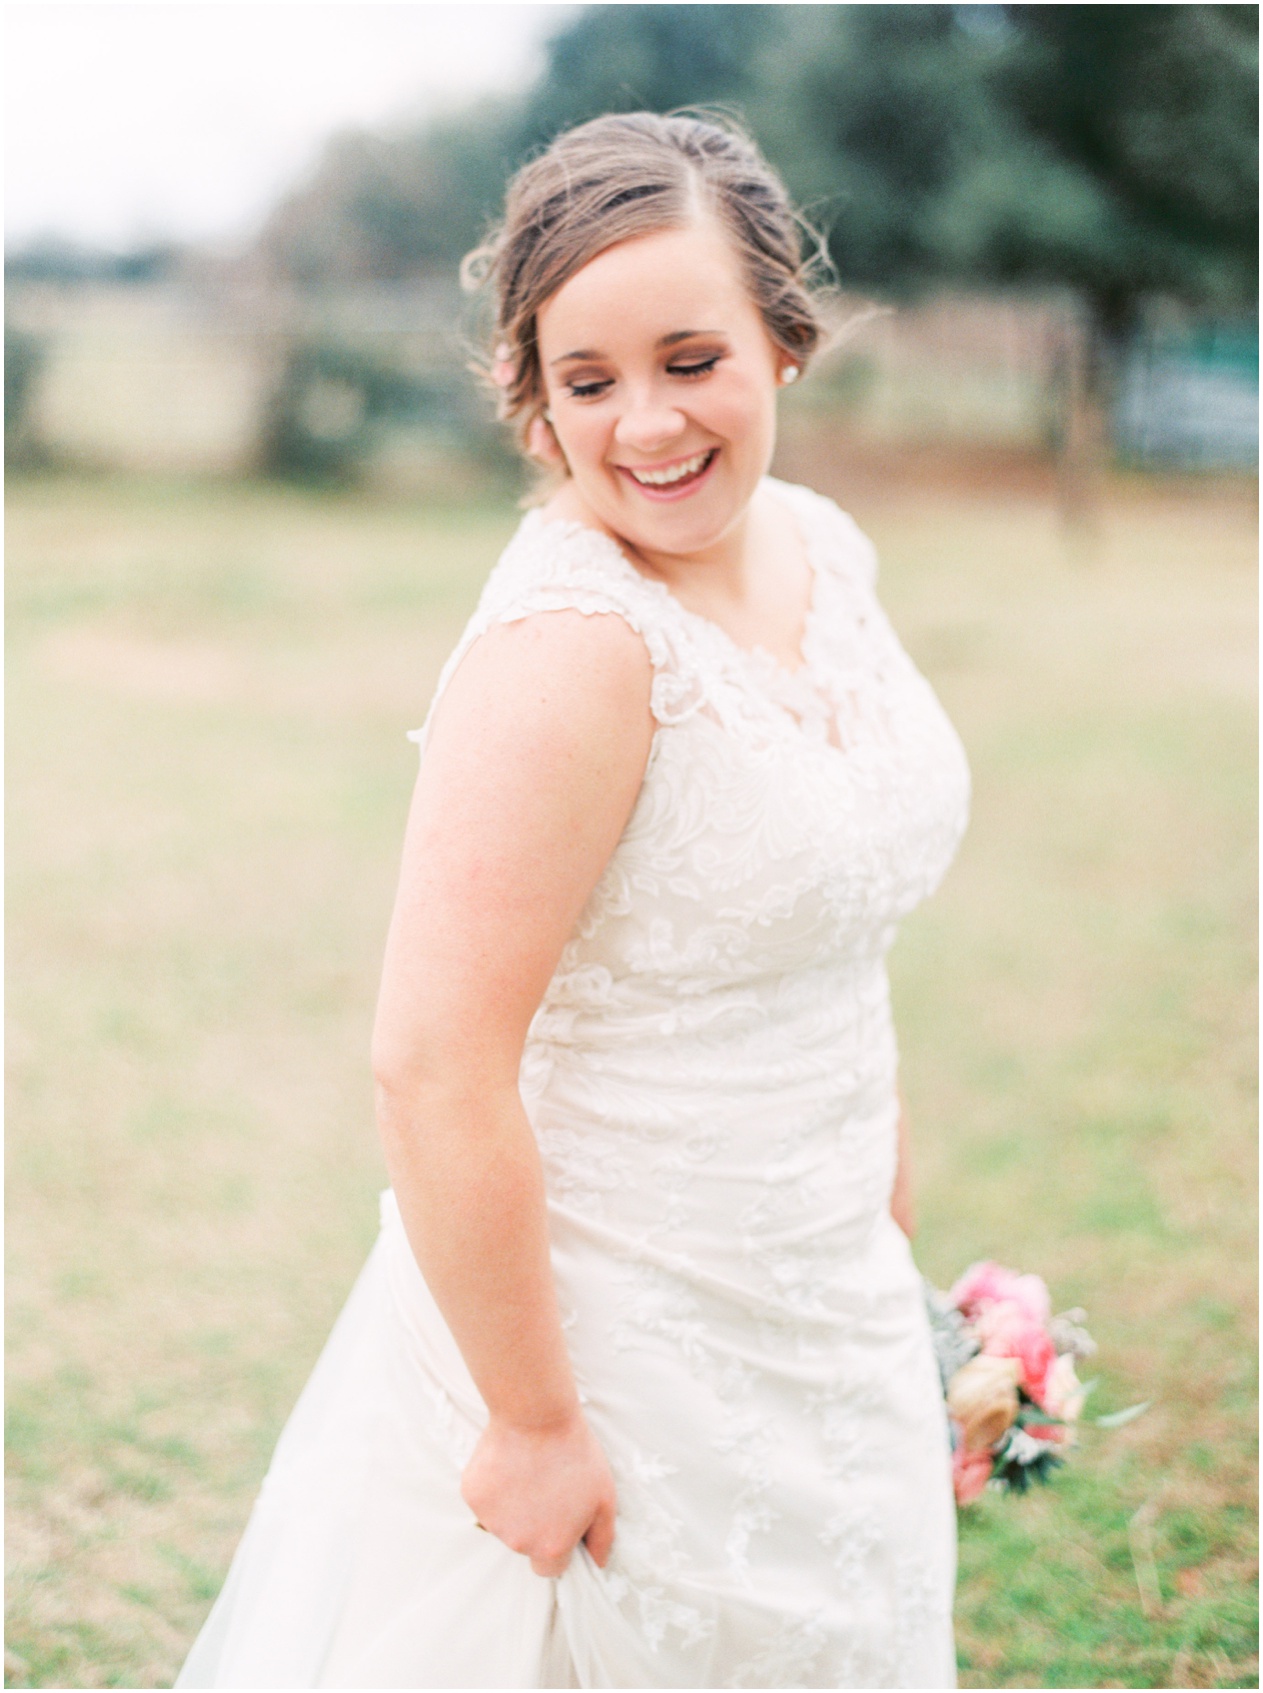 Sarah Best Photography - Claire's Bridals - The Amish Barn at Edge-18_STP.jpg